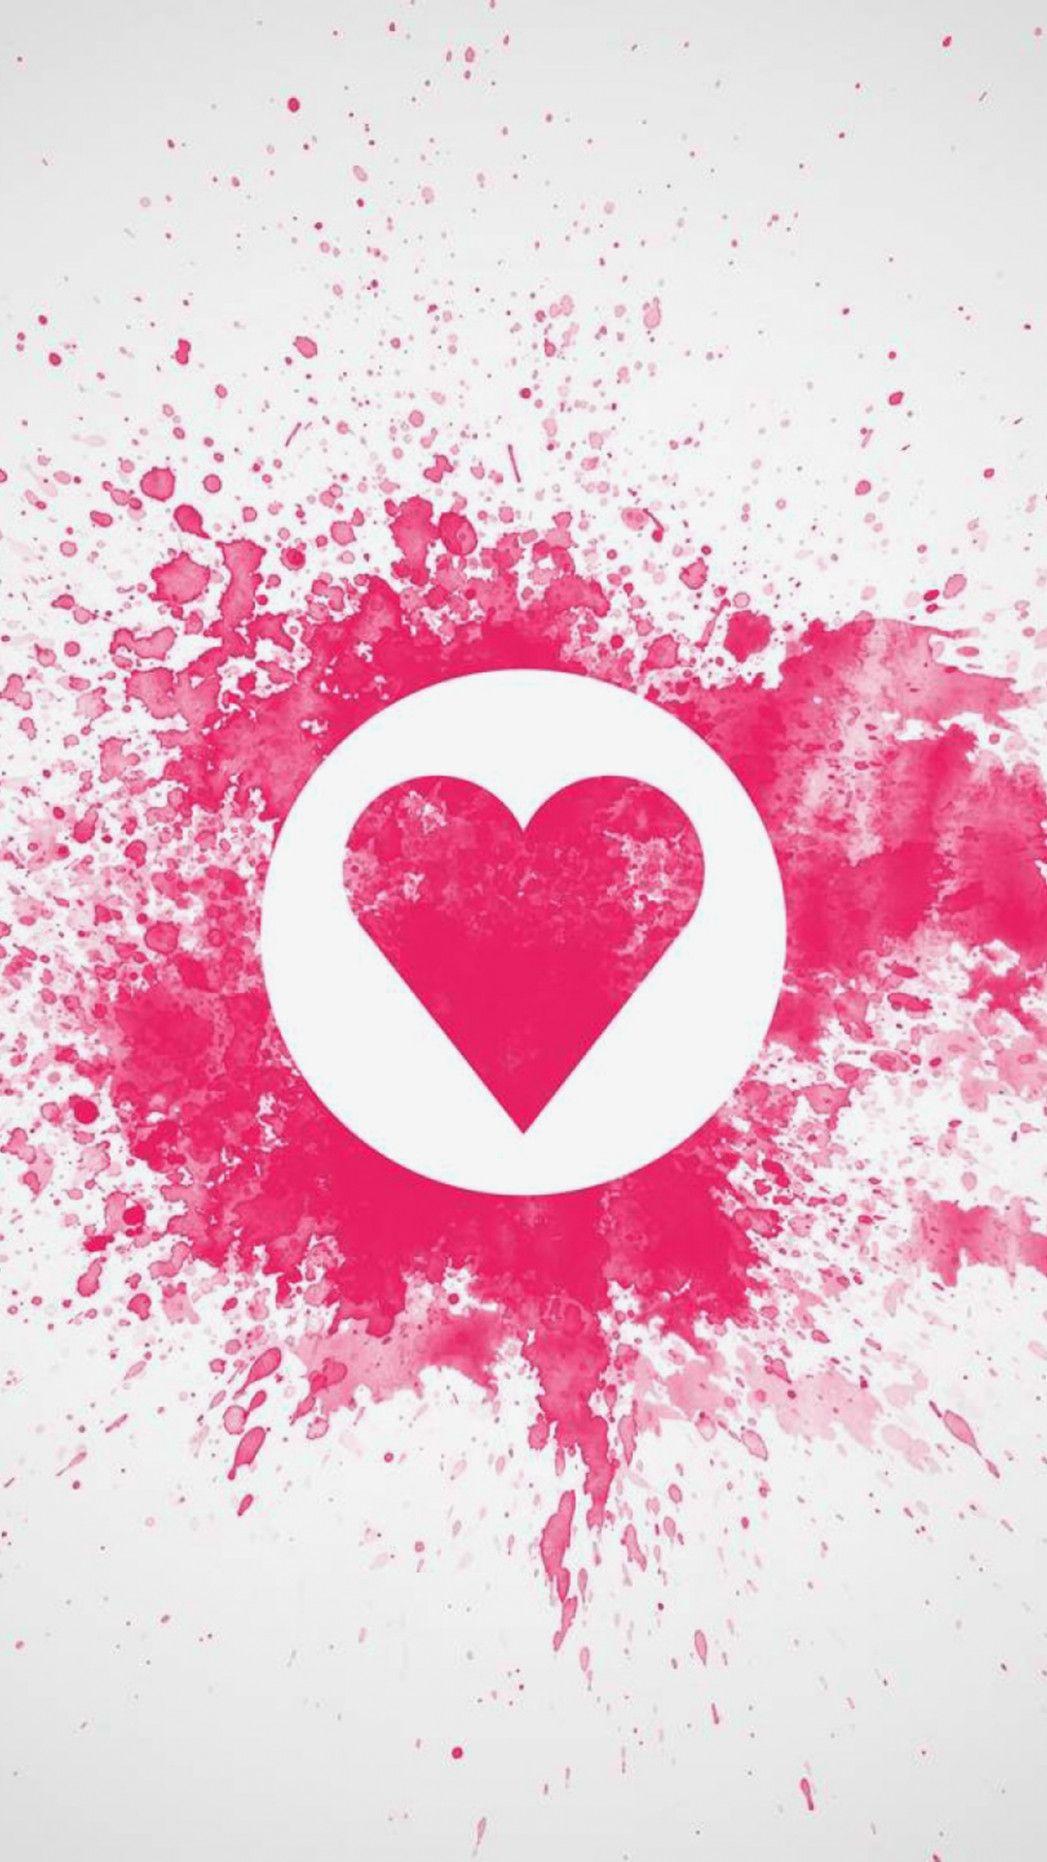 Abstract Love Heart Wallpaper. Mobile Wallpaper. Phone Background